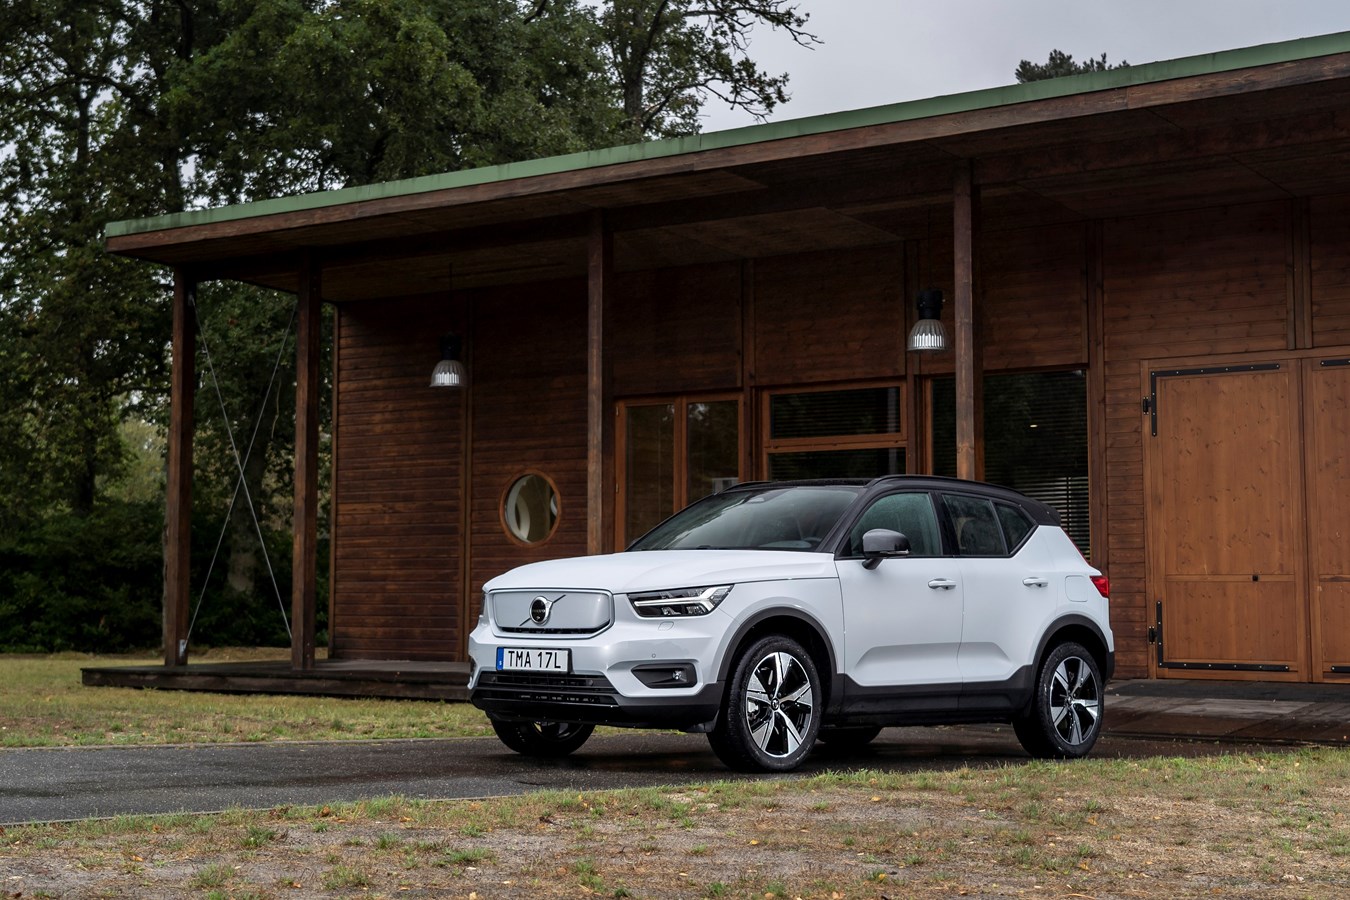 Volvo XC40 Recharge P8 AWD - Mortefontaine - septembre 2020